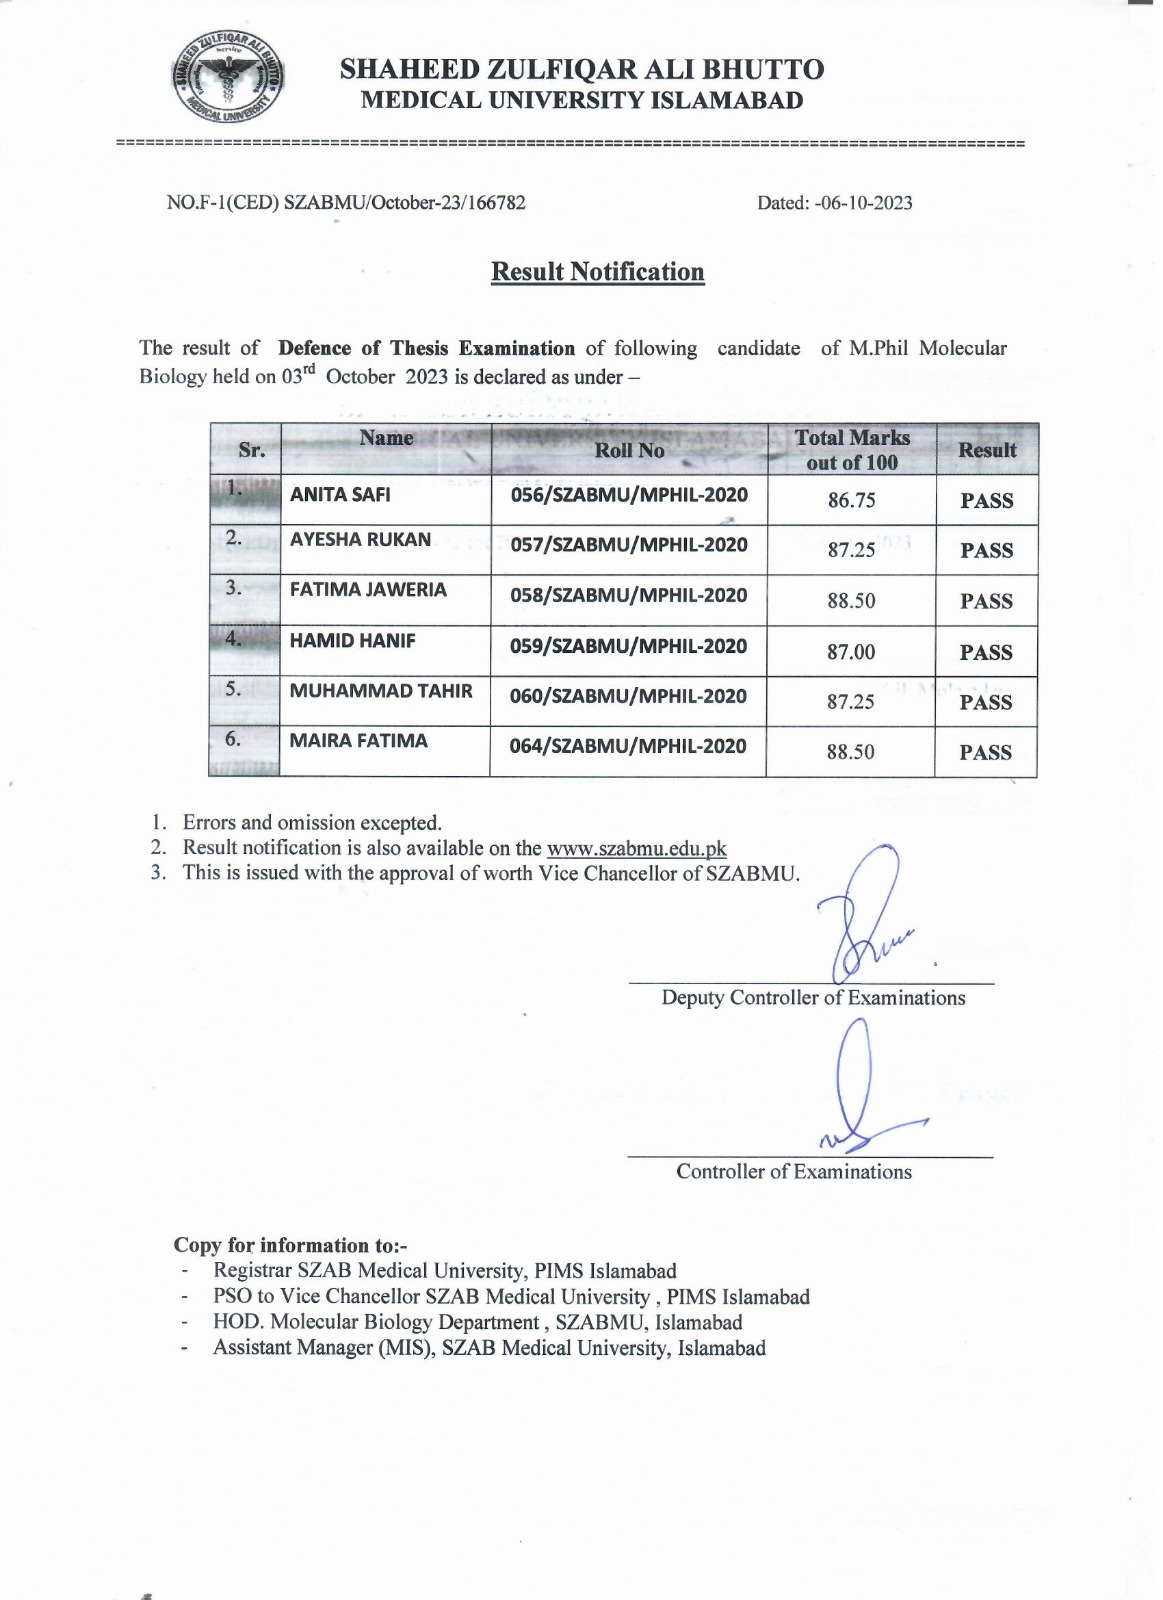 Result Notification - Defense of Thesis Examinations for M.Phil. Molecular Biology 3rd October 2023